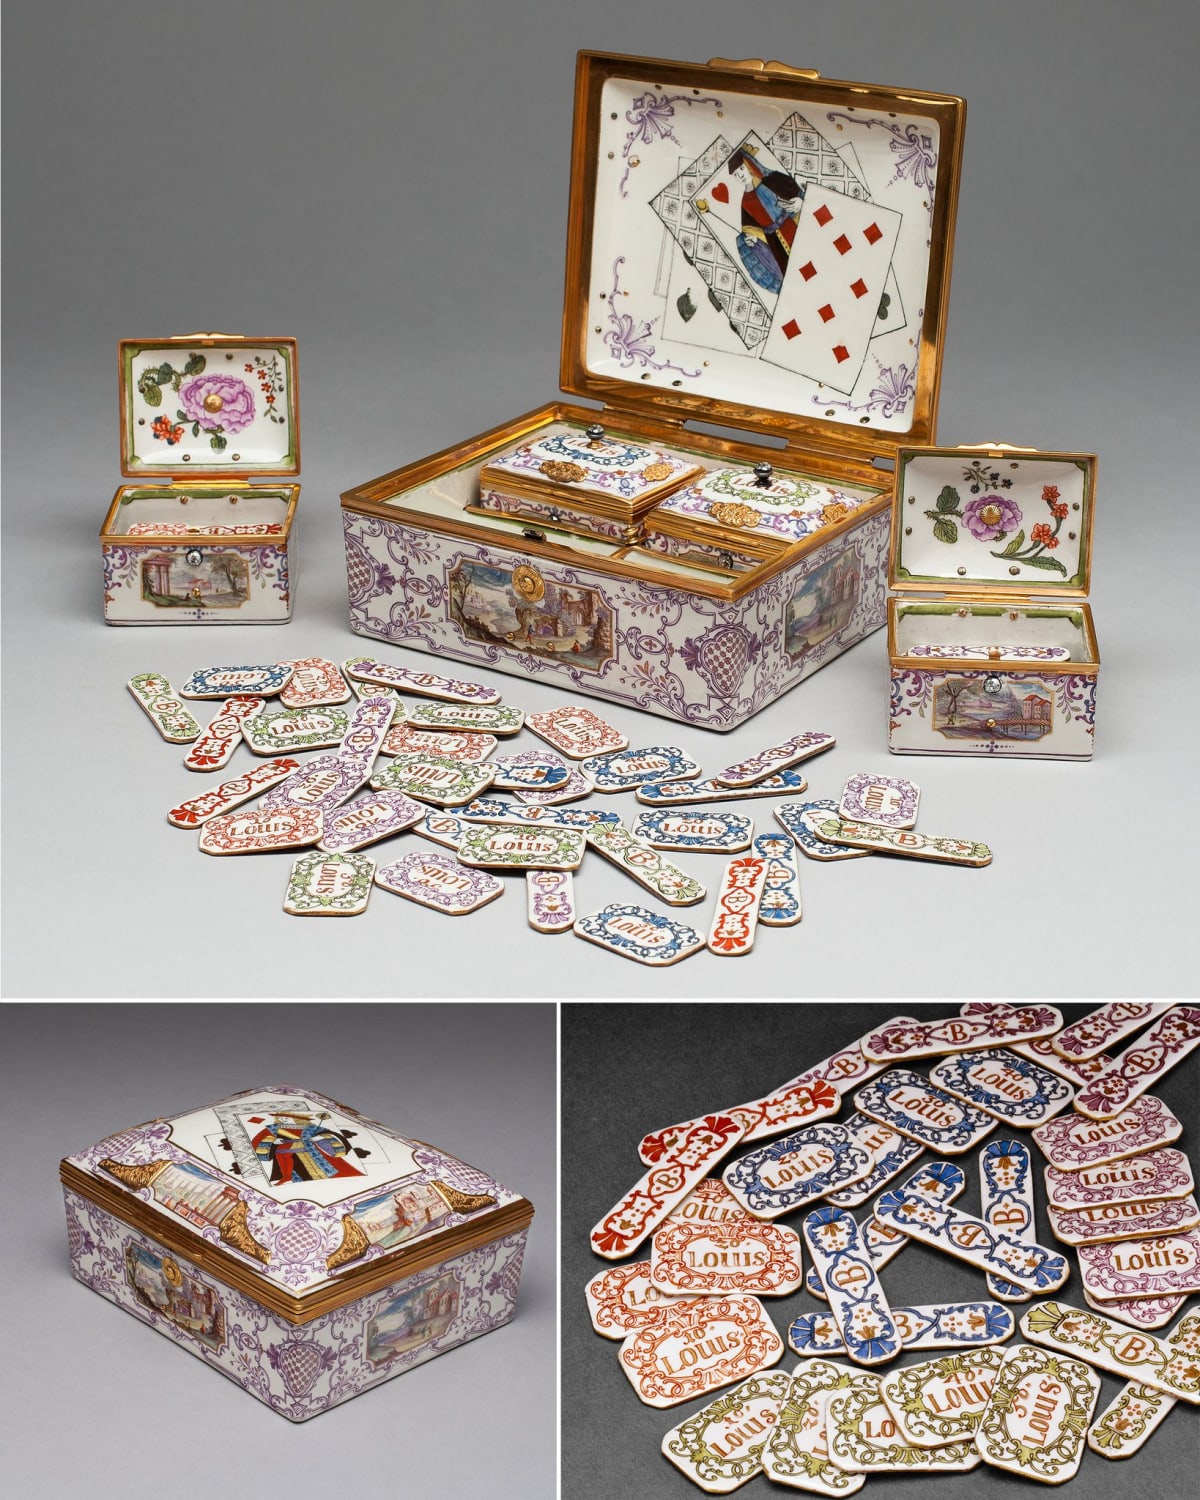 With its liberal use of gold and diamonds, this extravagant 18th-century gaming box ranks among the most exceptional works of art produced by the Du Paquier Porcelain Manufactory during its short twenty-five-year existence—#NowOnView in European Art.